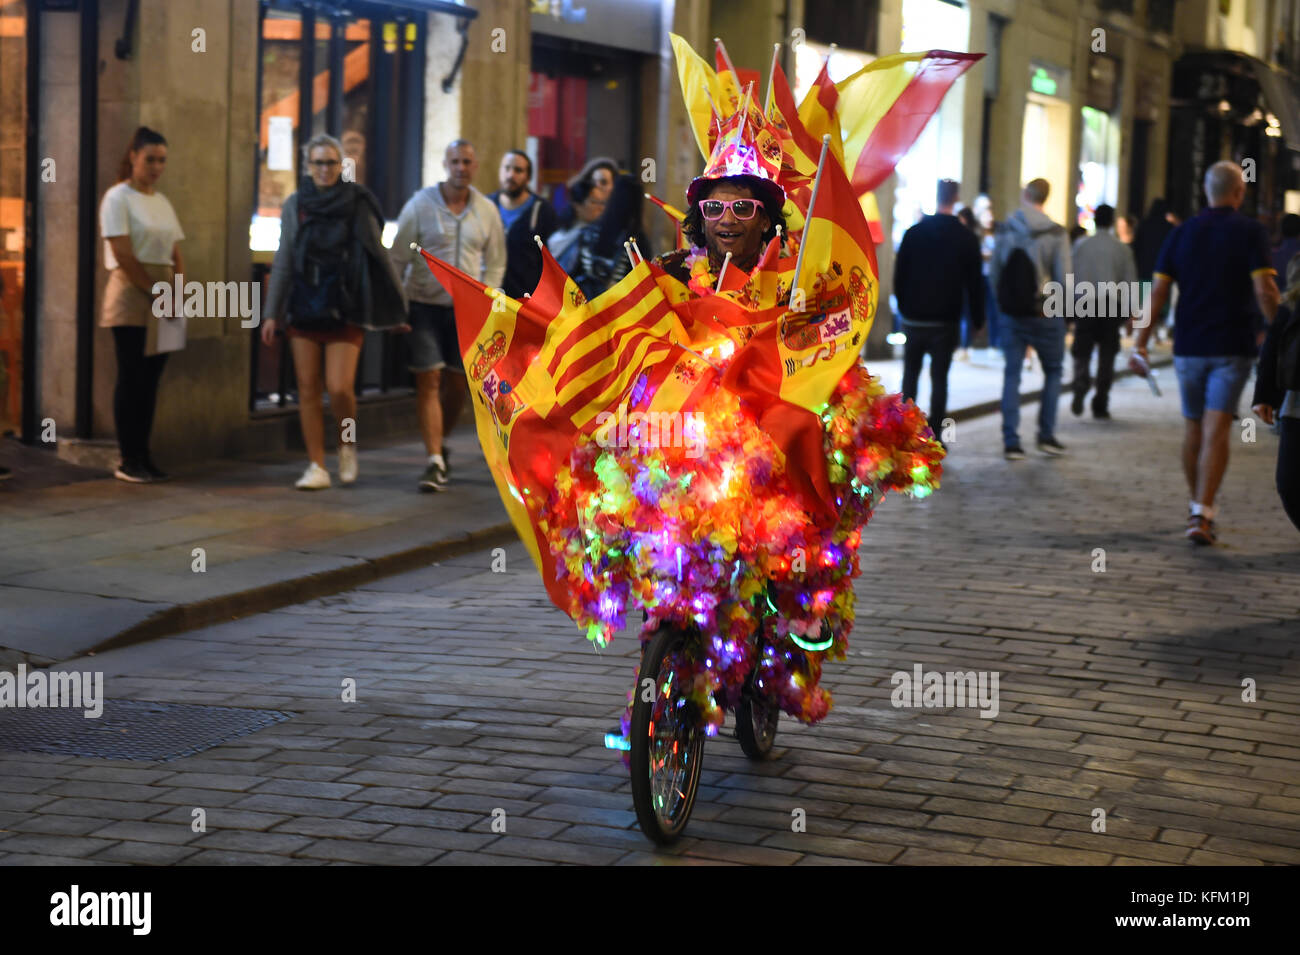 The light artist Jamal drives on his colourfully decorated bicycle with Spanish flags across Barcelona, 29 Octoebr 2017. Jamal, who is of Jamaican origin, attached several paper flowers, chain of lights and Spanish flags to his bike and drives around the streets in the night time. 'This is my personal demonstration for the unity of Spain', says Jamal. Photo: Andrej Sokolow/dpa Stock Photo